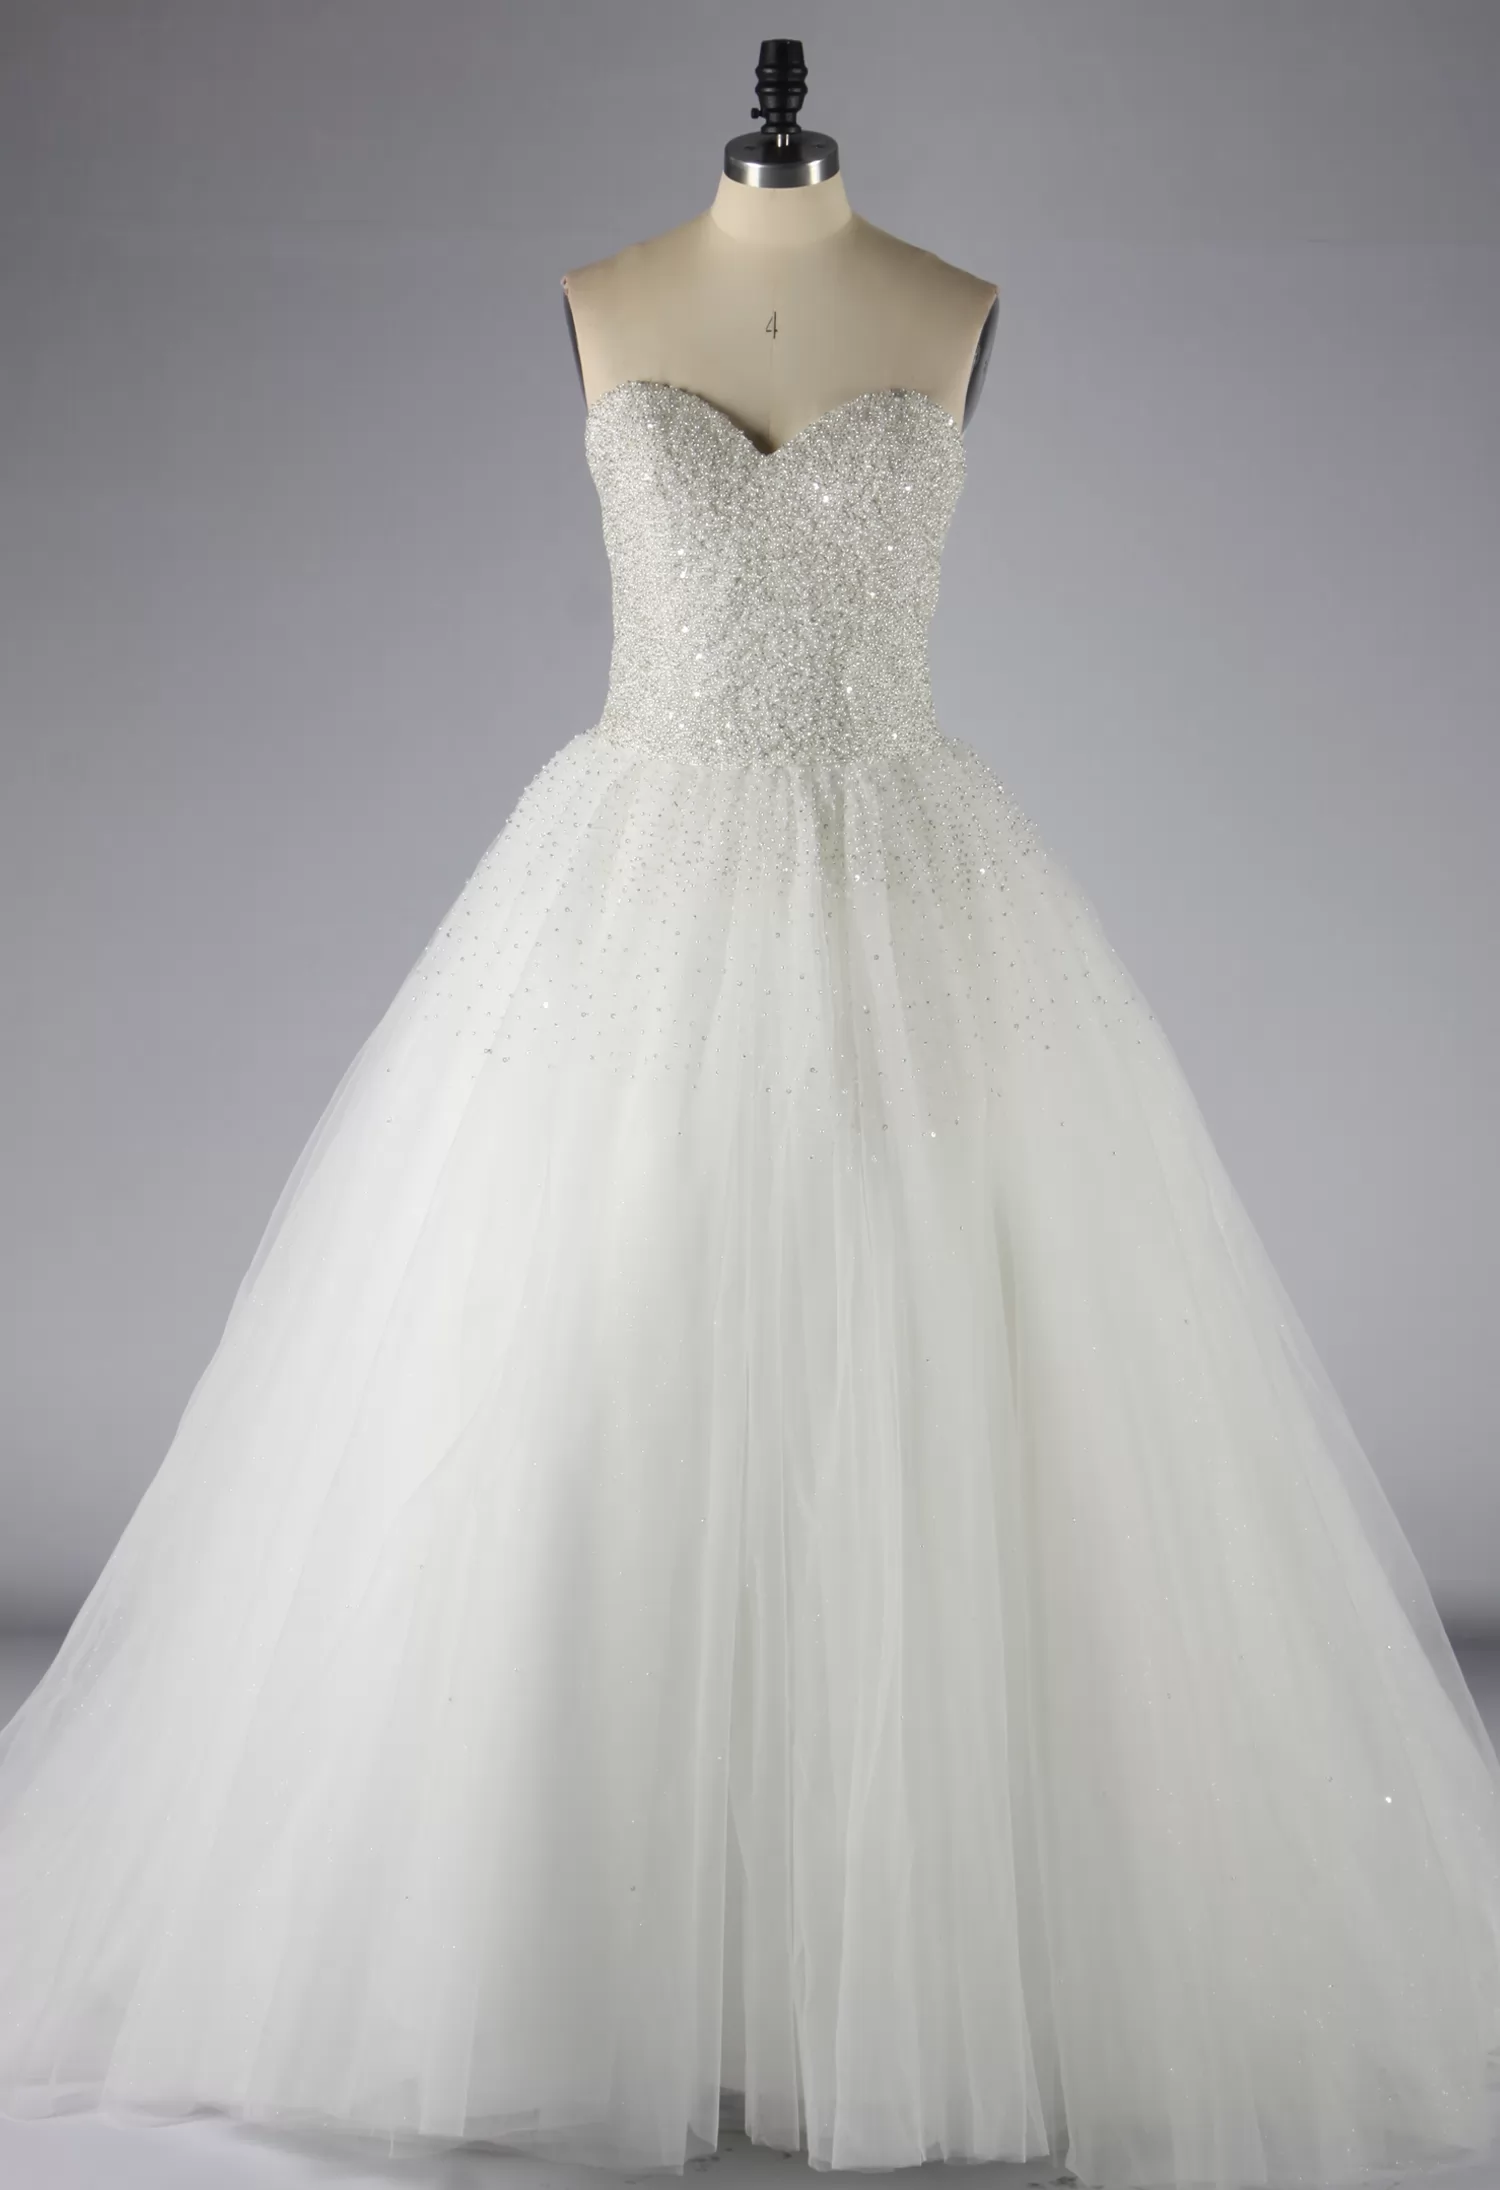 Sparkling Sweetheart Crystal Beaded Tulle Ballgown Wedding Dress